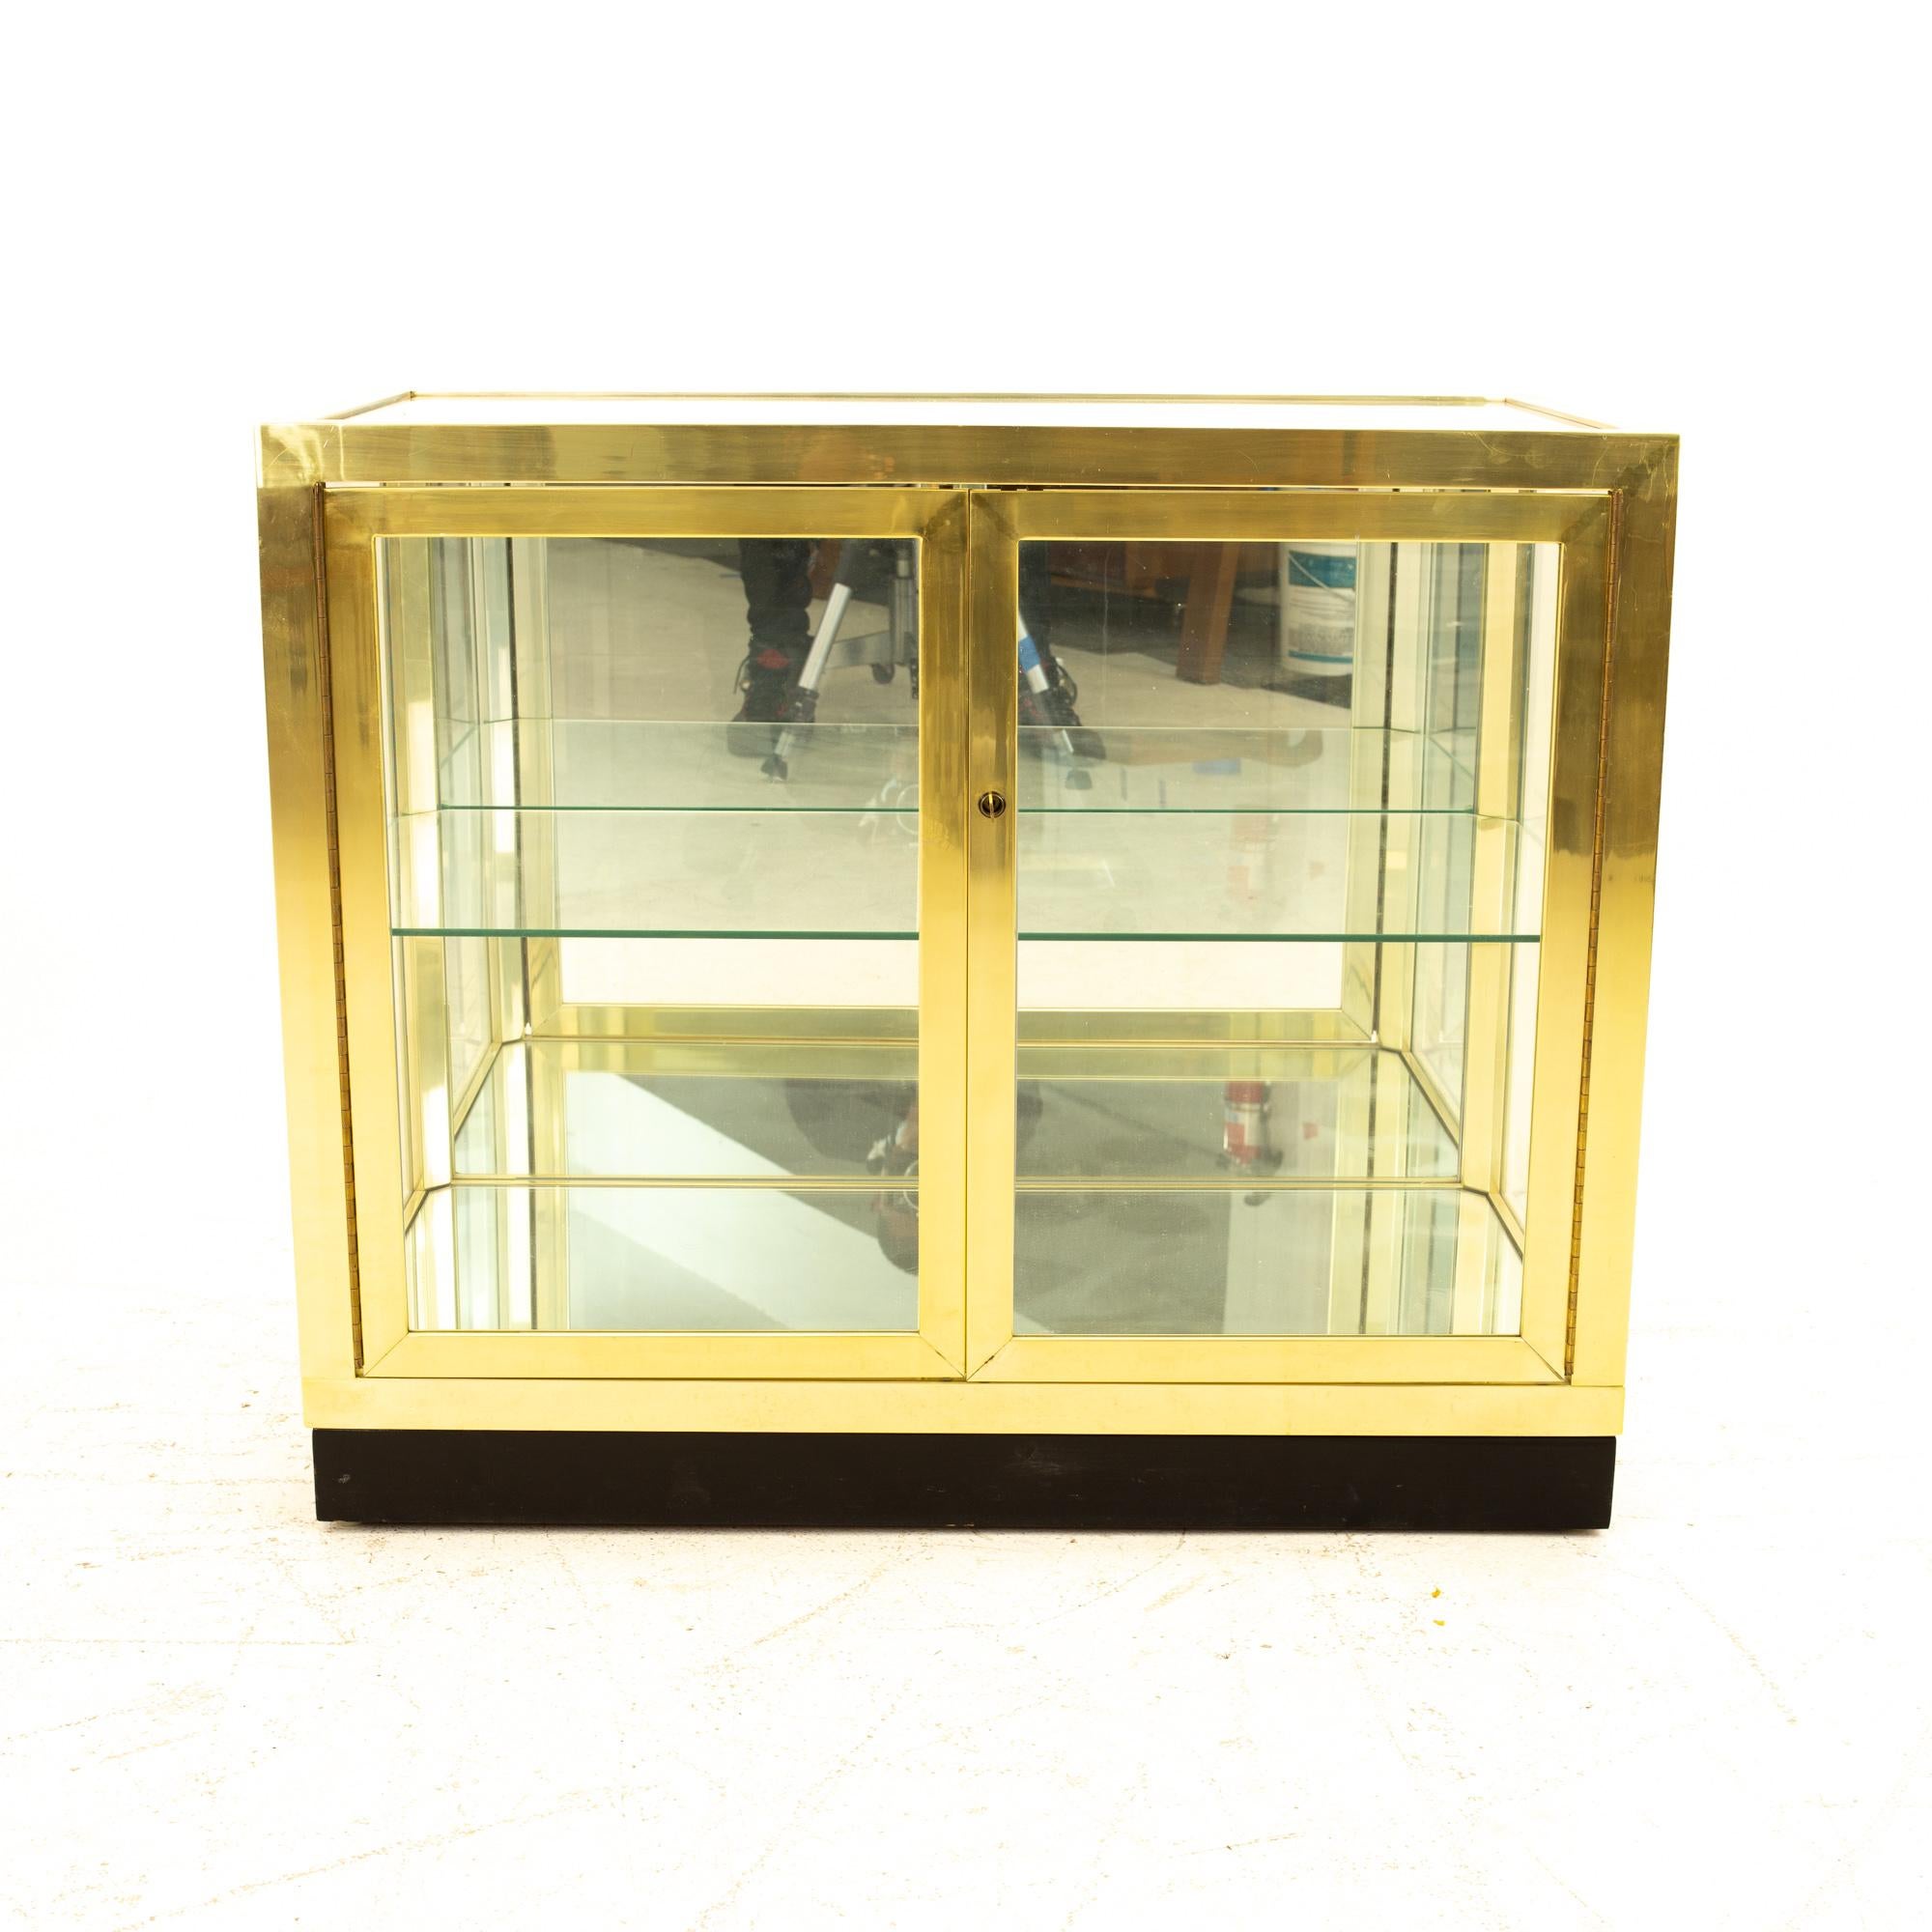 Mastercraft Mid Century brass and glass display cabinet

Cabinet measures: 36 wide x 18 deep x 30.25 high

This piece is available in what we call restored vintage condition. Upon purchase it is thoroughly cleaned and minor repairs are made - all of